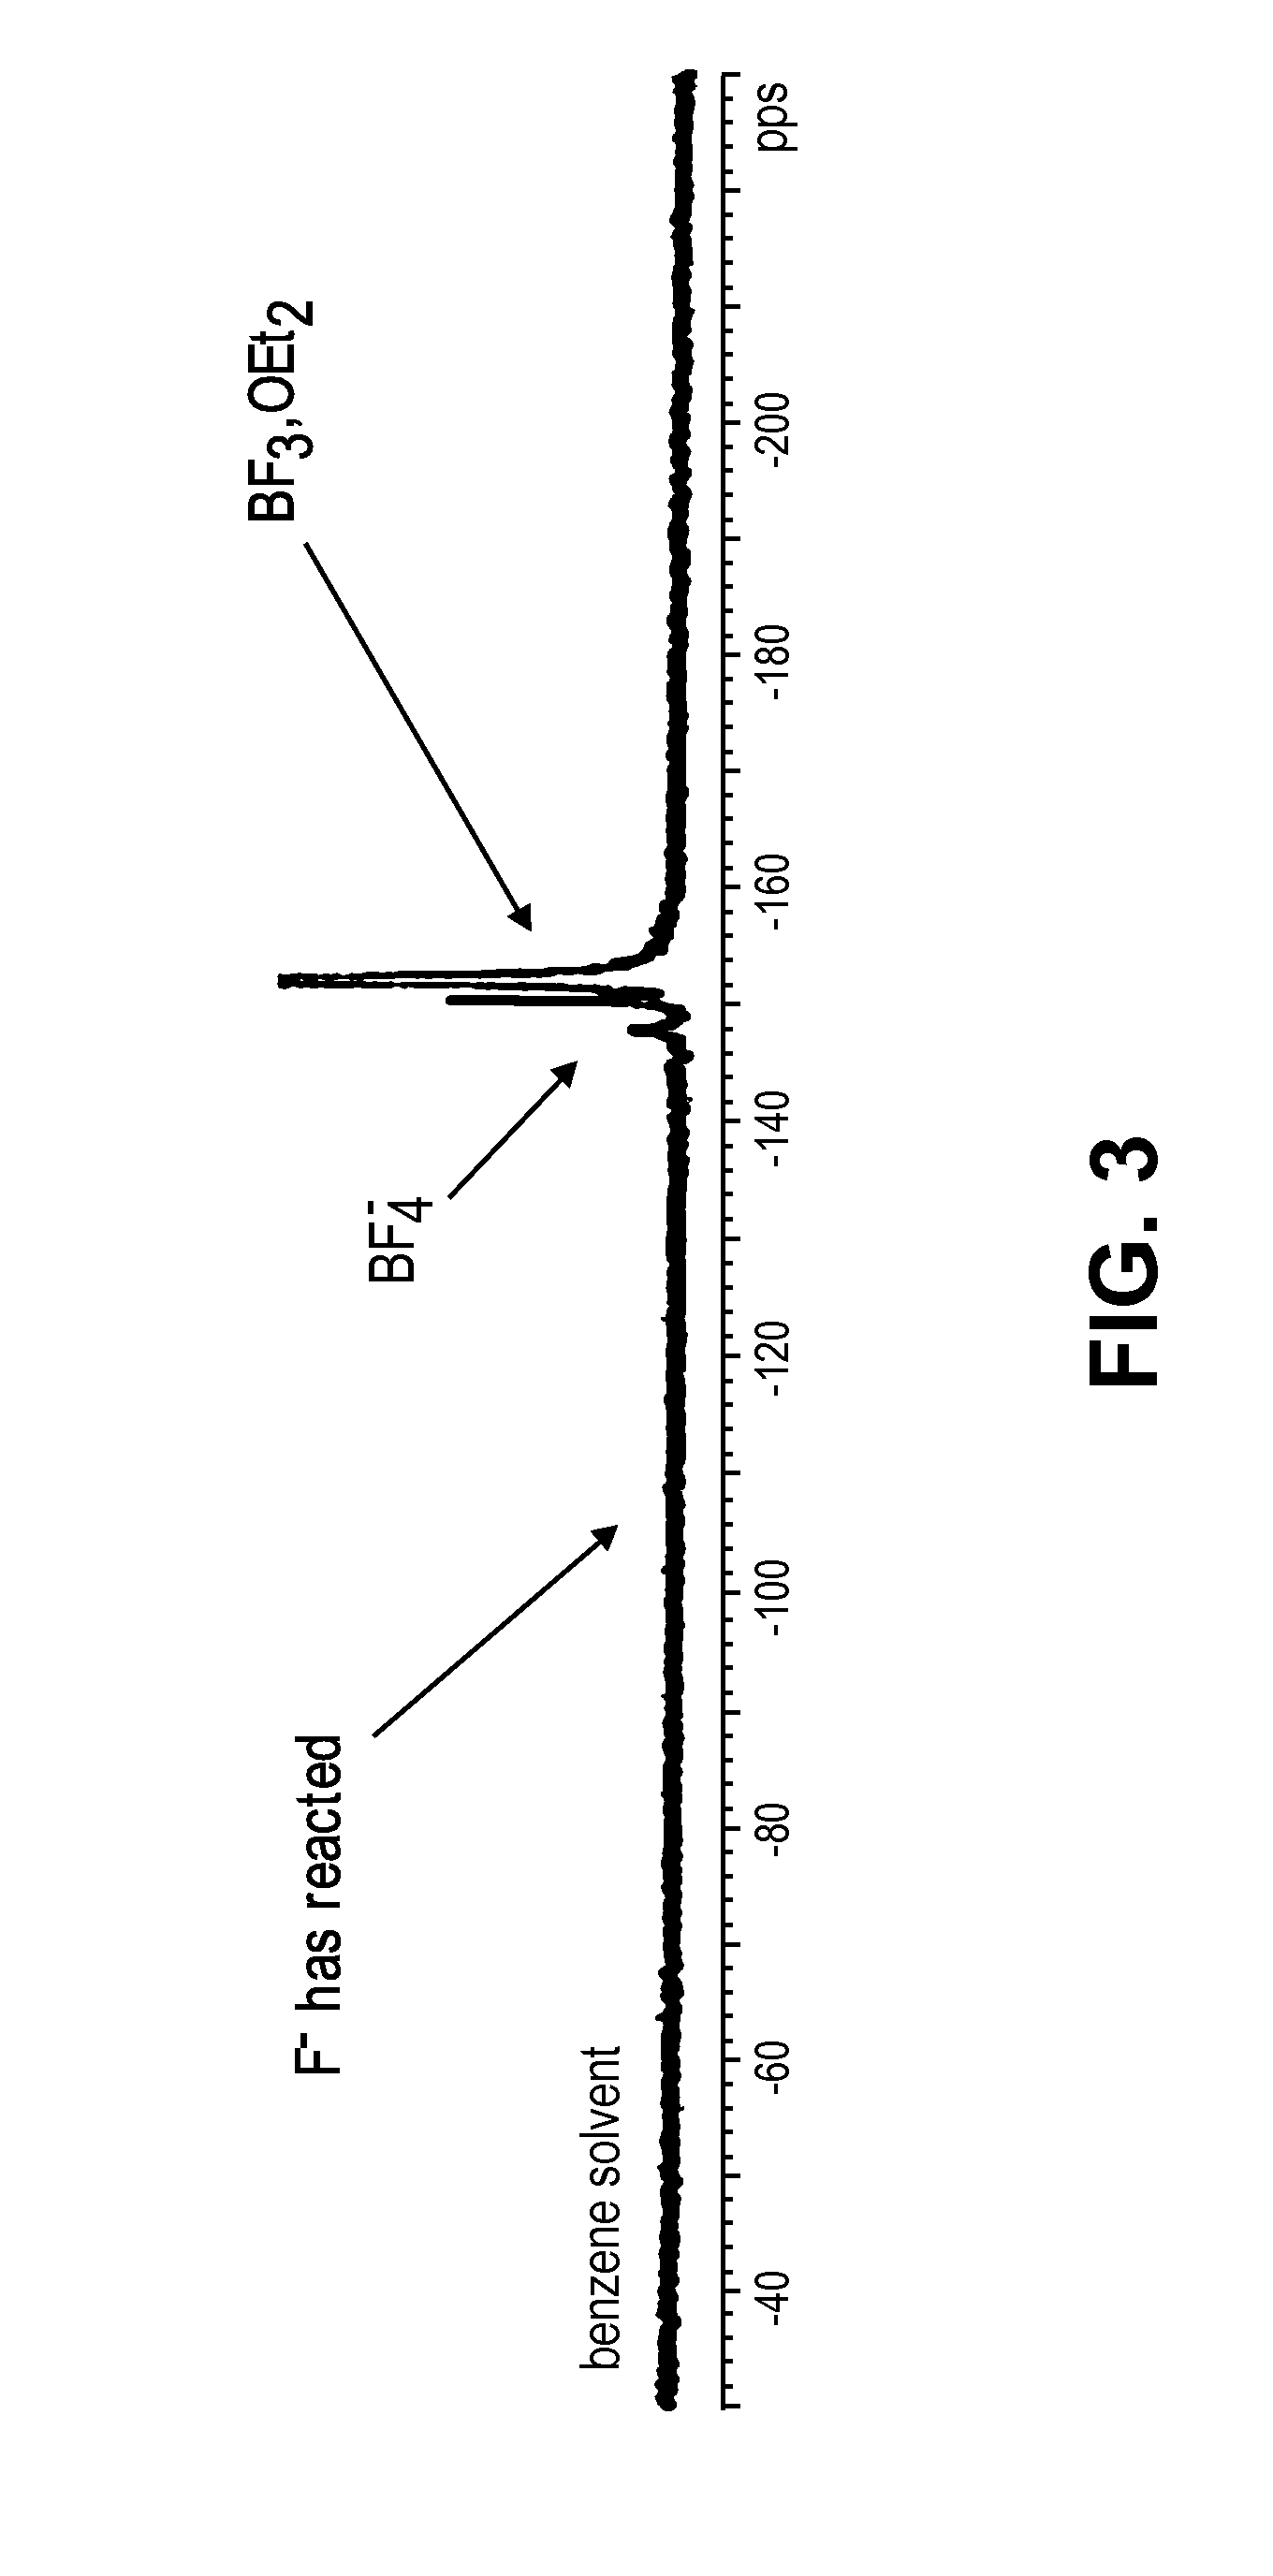 Fluoride Ion Battery Electrolyte Compositions